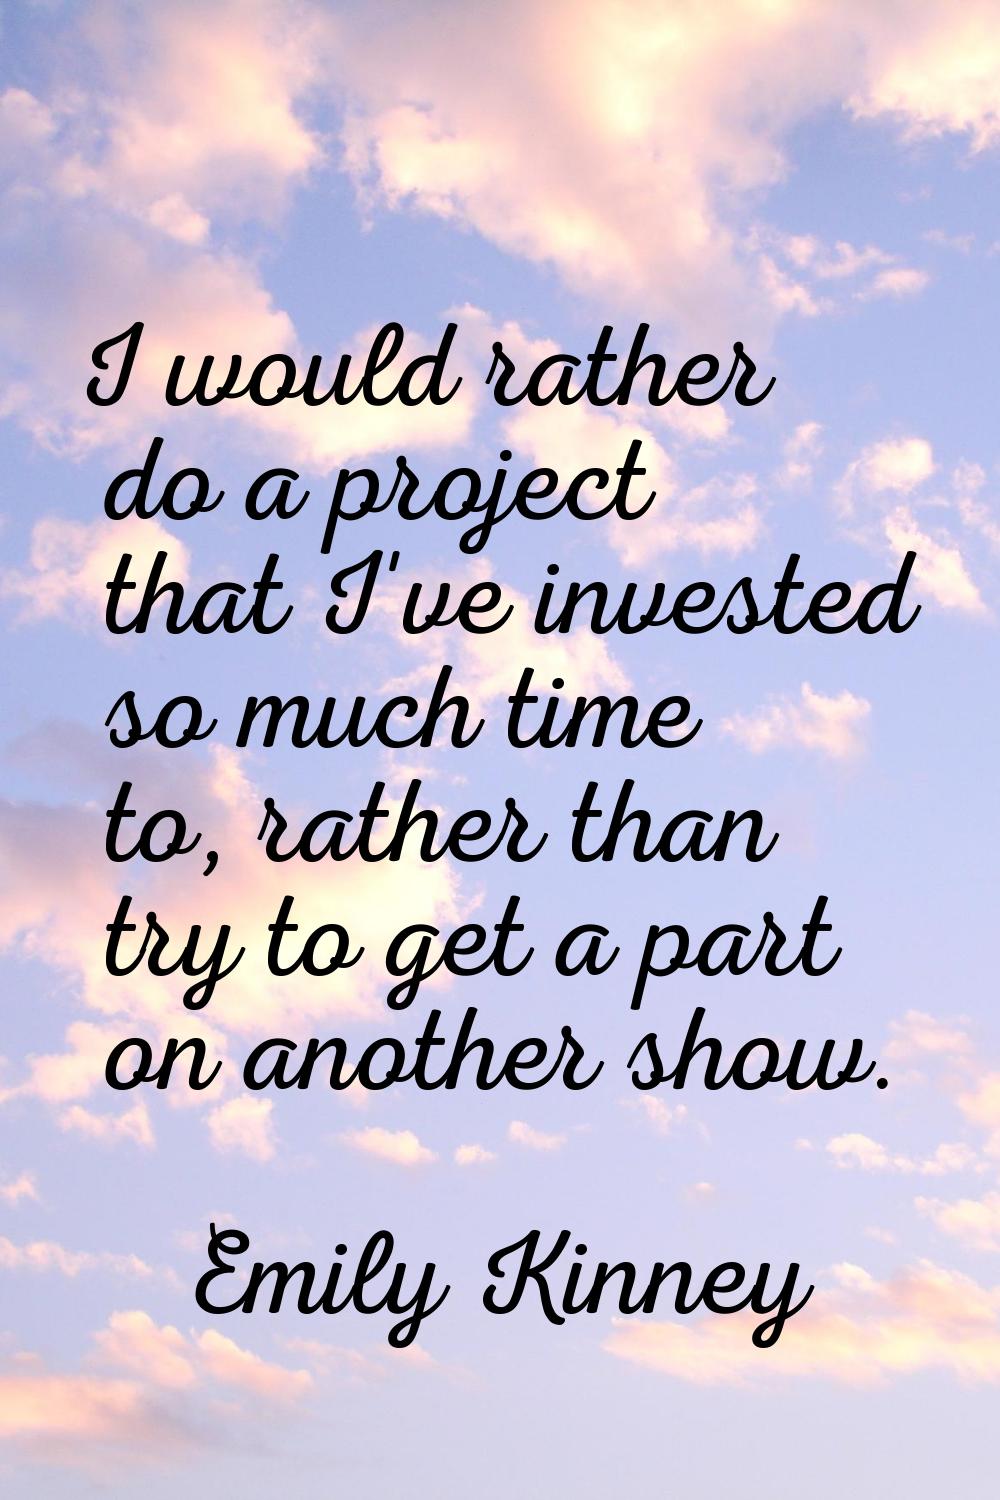 I would rather do a project that I've invested so much time to, rather than try to get a part on an